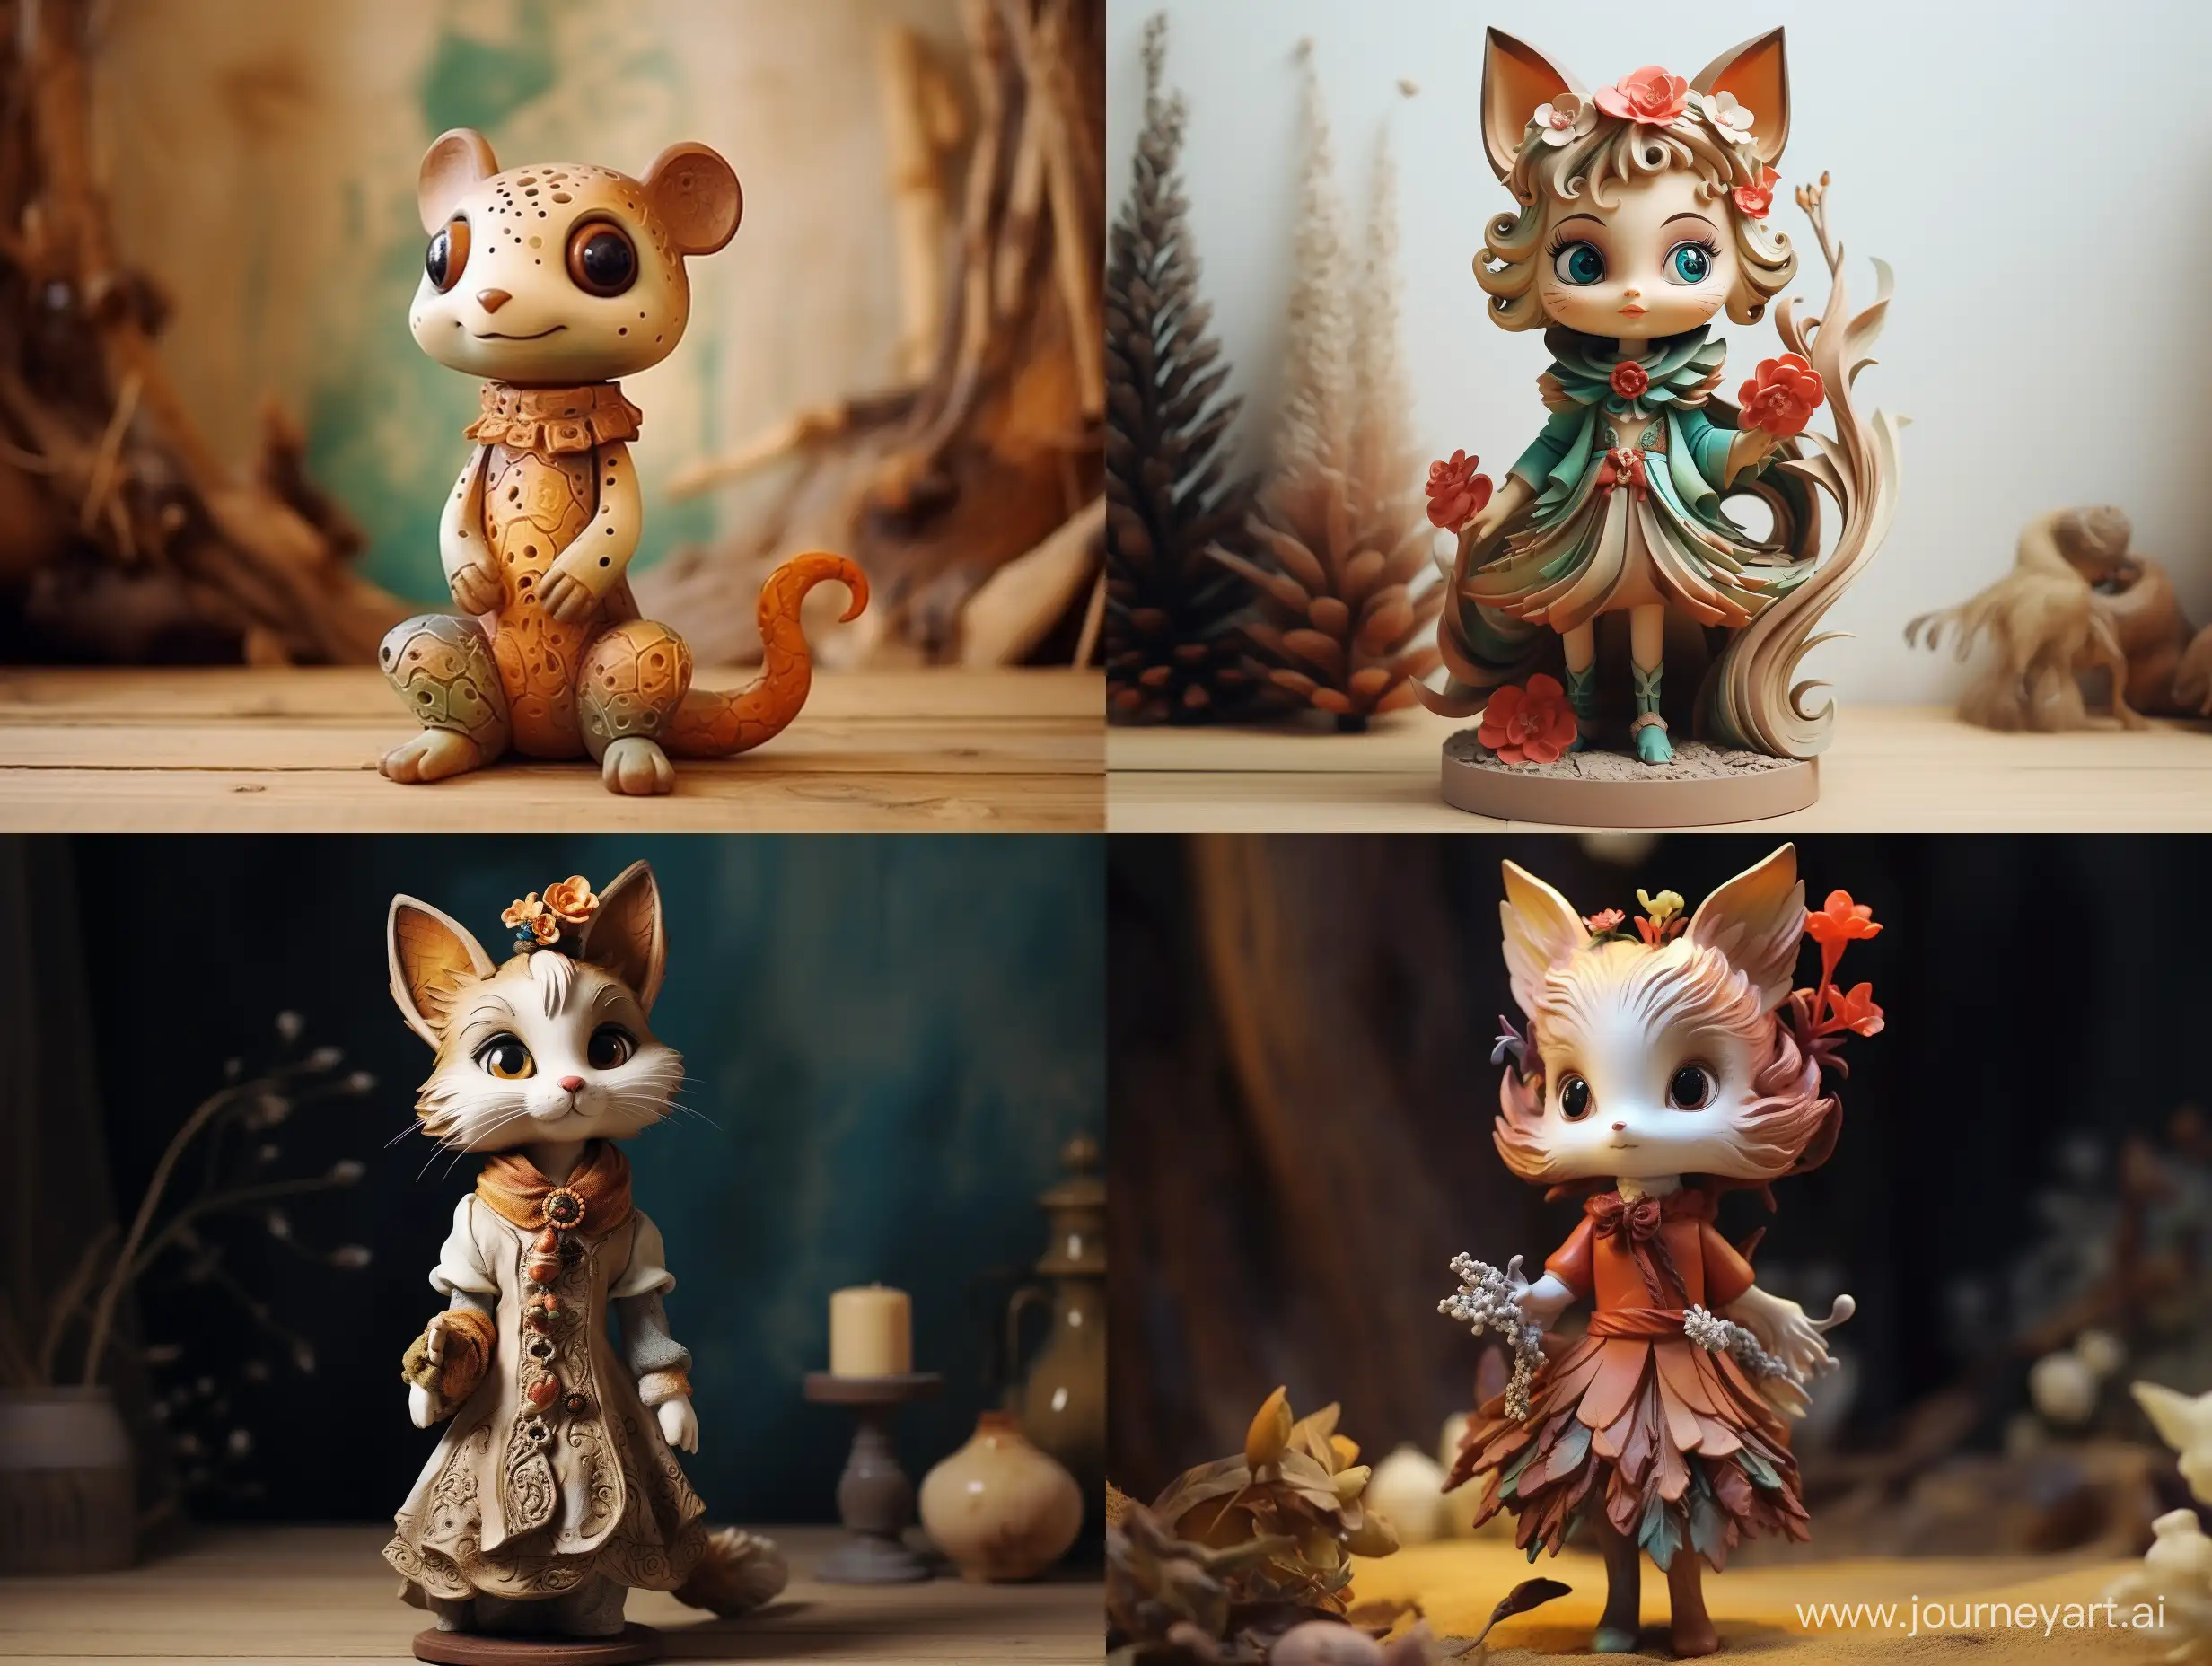 Charming-Clay-Art-Imaginary-Fairy-Tale-Character-Statuette